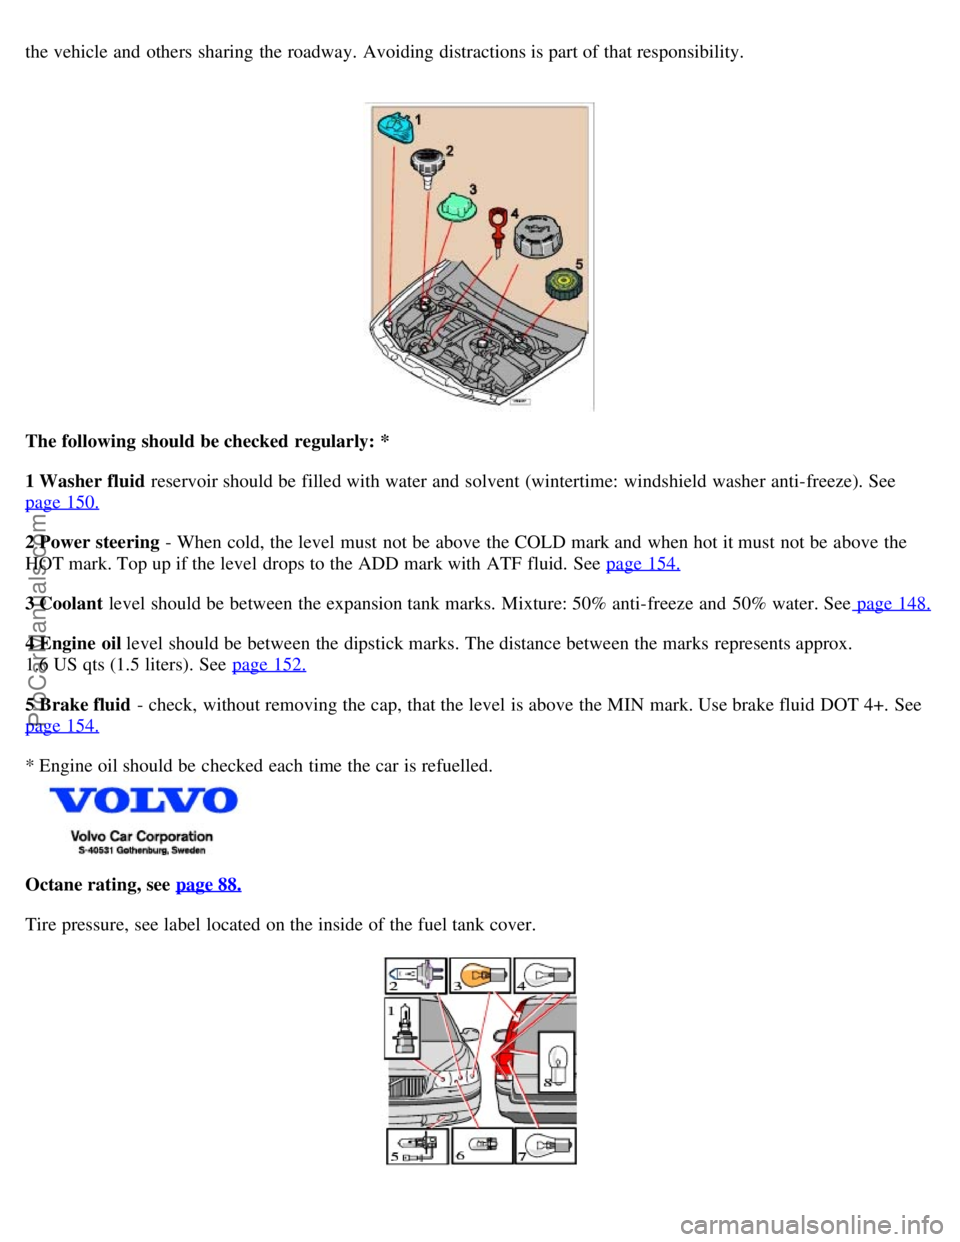 VOLVO V70 2005  Owners Manual the vehicle and  others  sharing  the roadway.  Avoiding distractions is part of that responsibility.  
The following  should be checked  regularly: *
1 Washer fluid  reservoir should be  filled with 